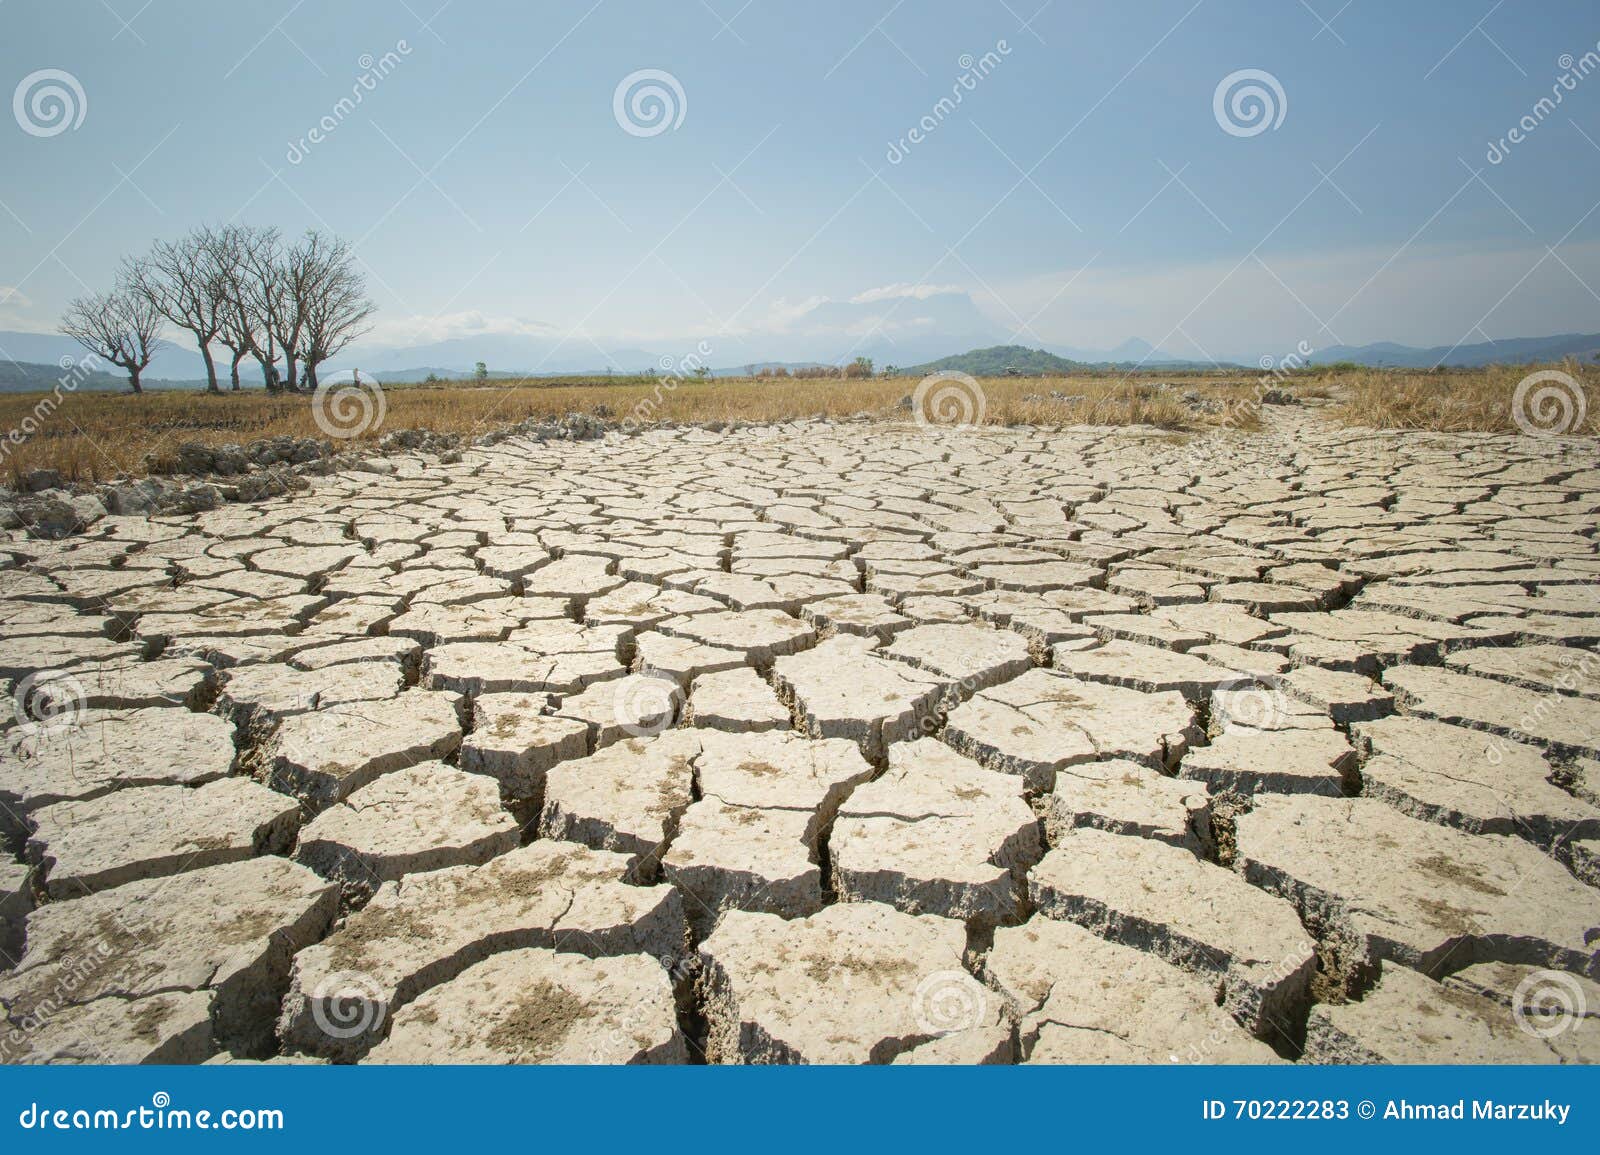 global warming issue, ground land are dry, drought conditions